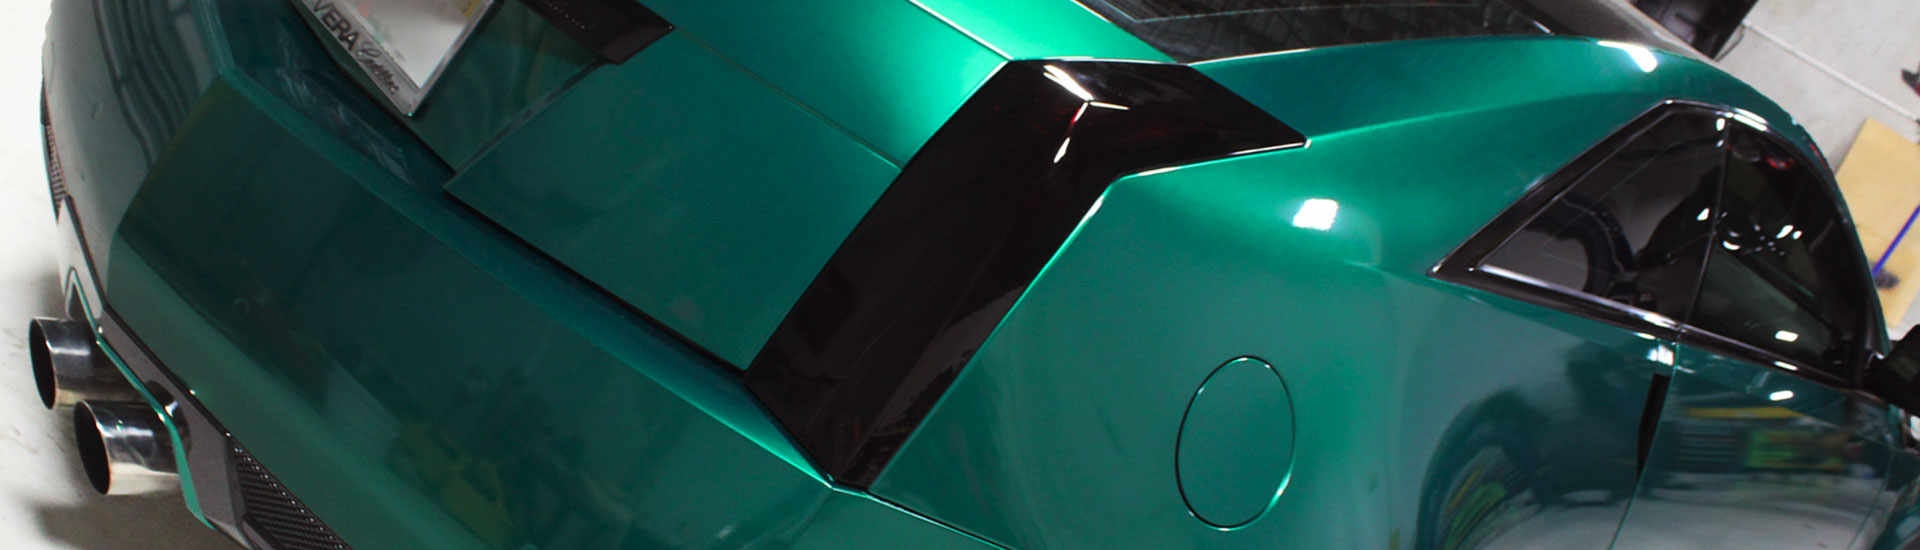 Cadillac Tail Light Tint Covers